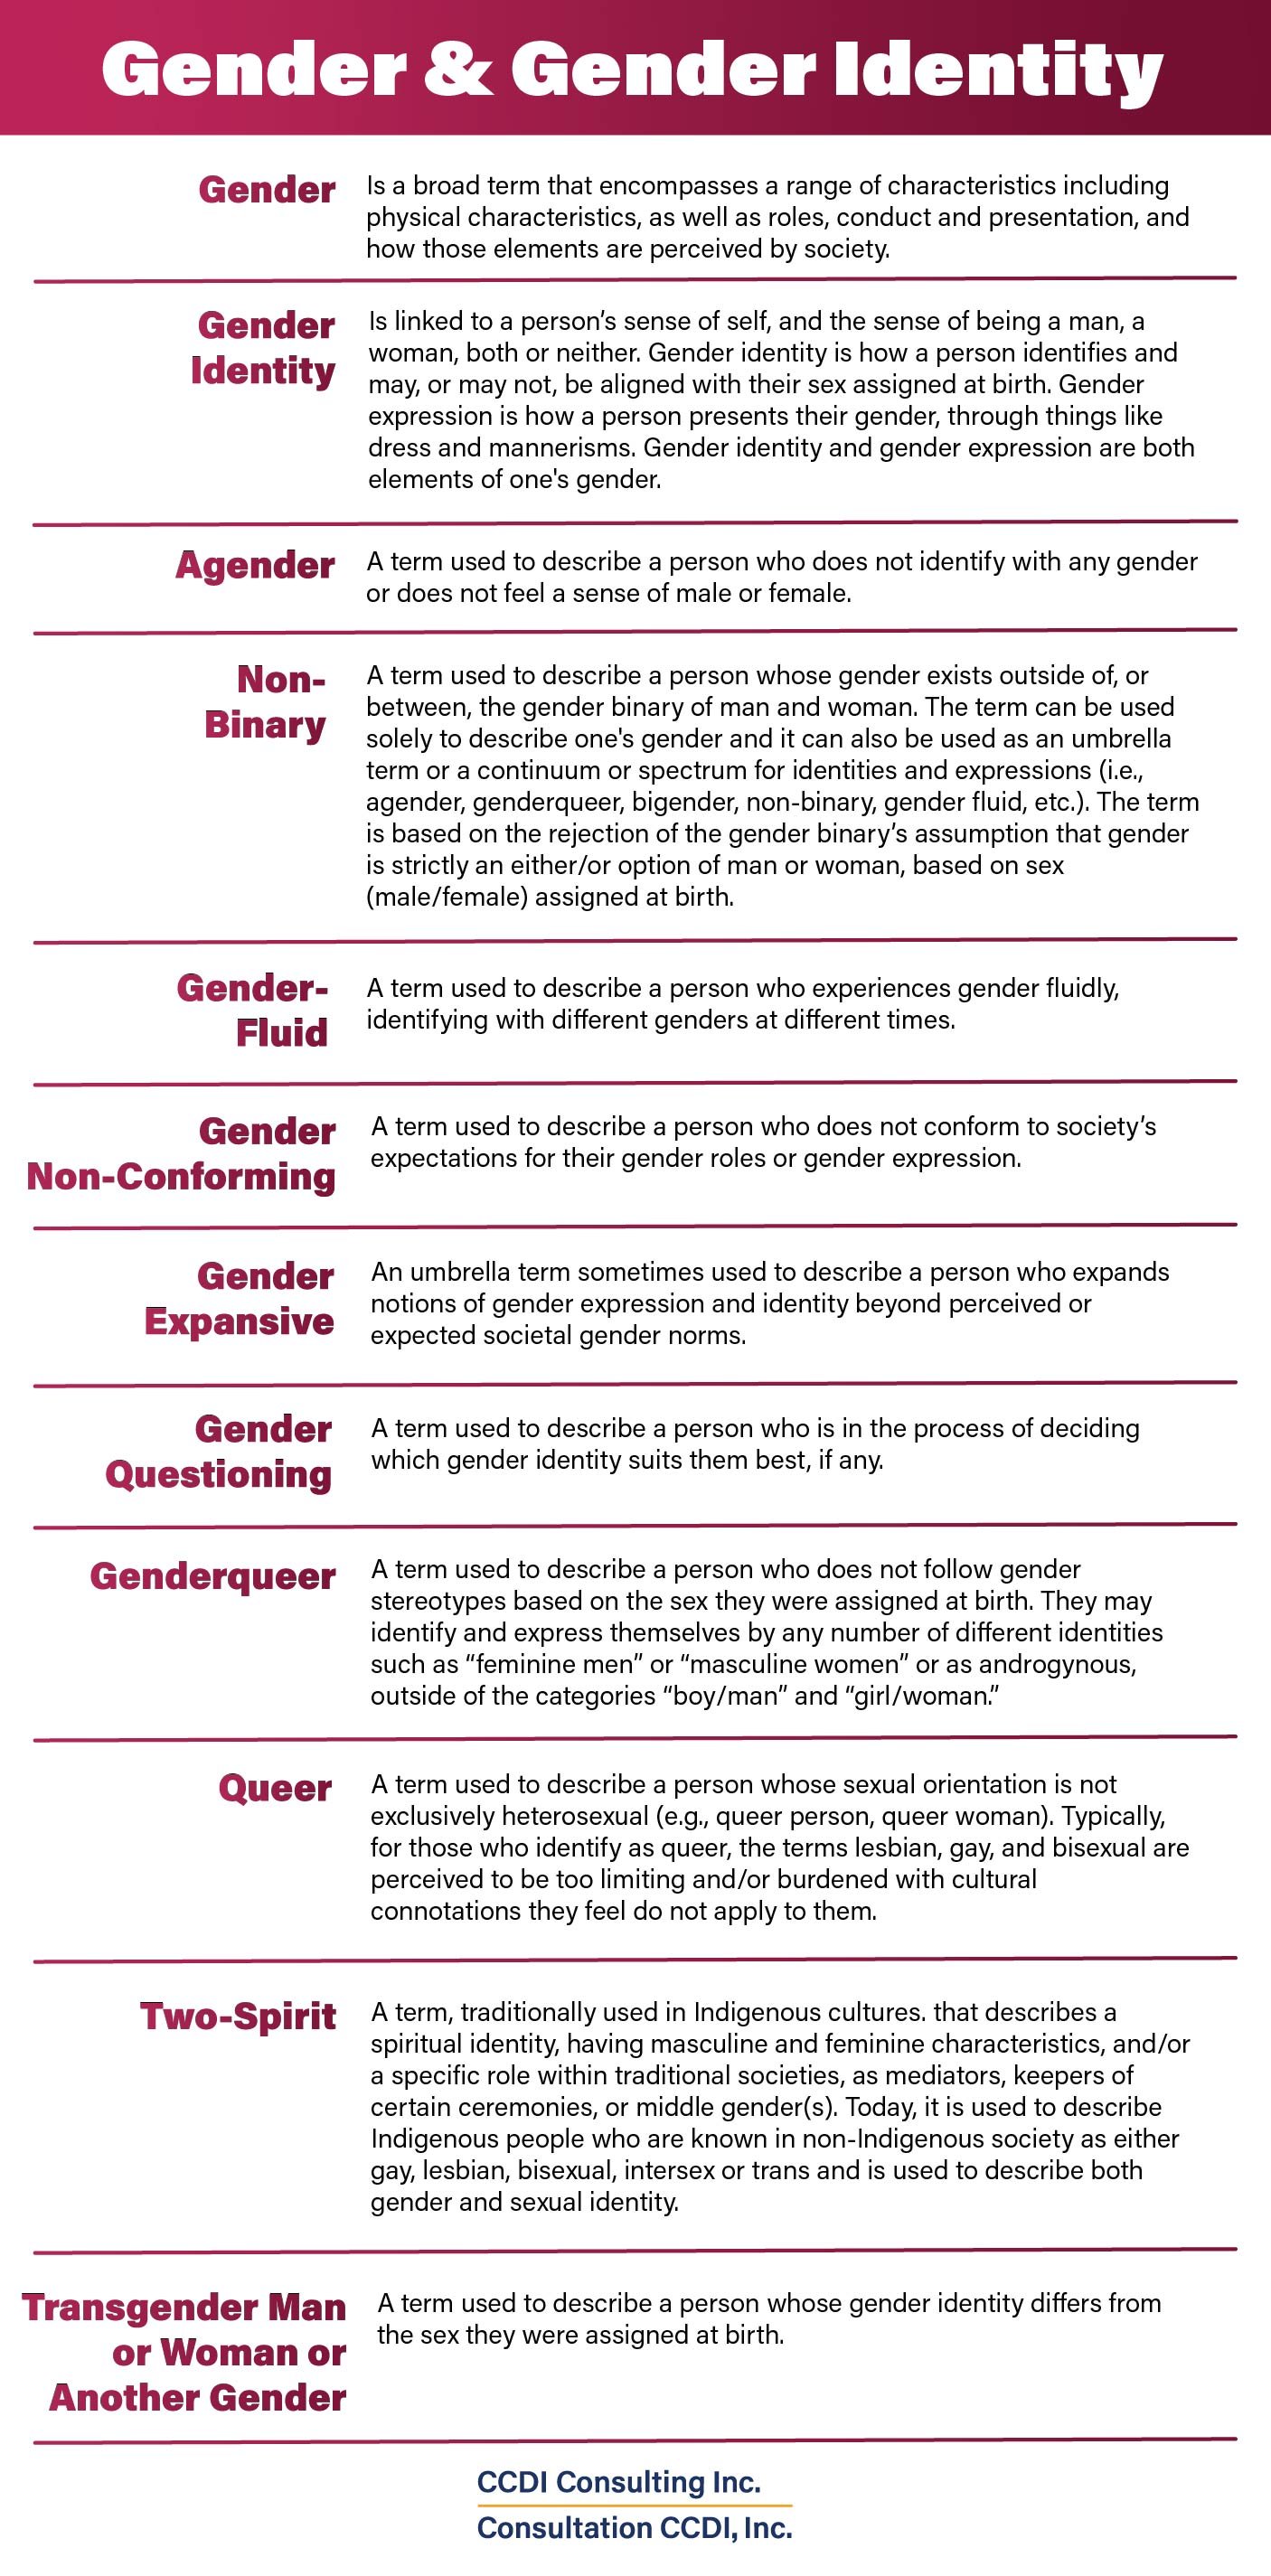 Gender and Gender Identity Terms Infographic